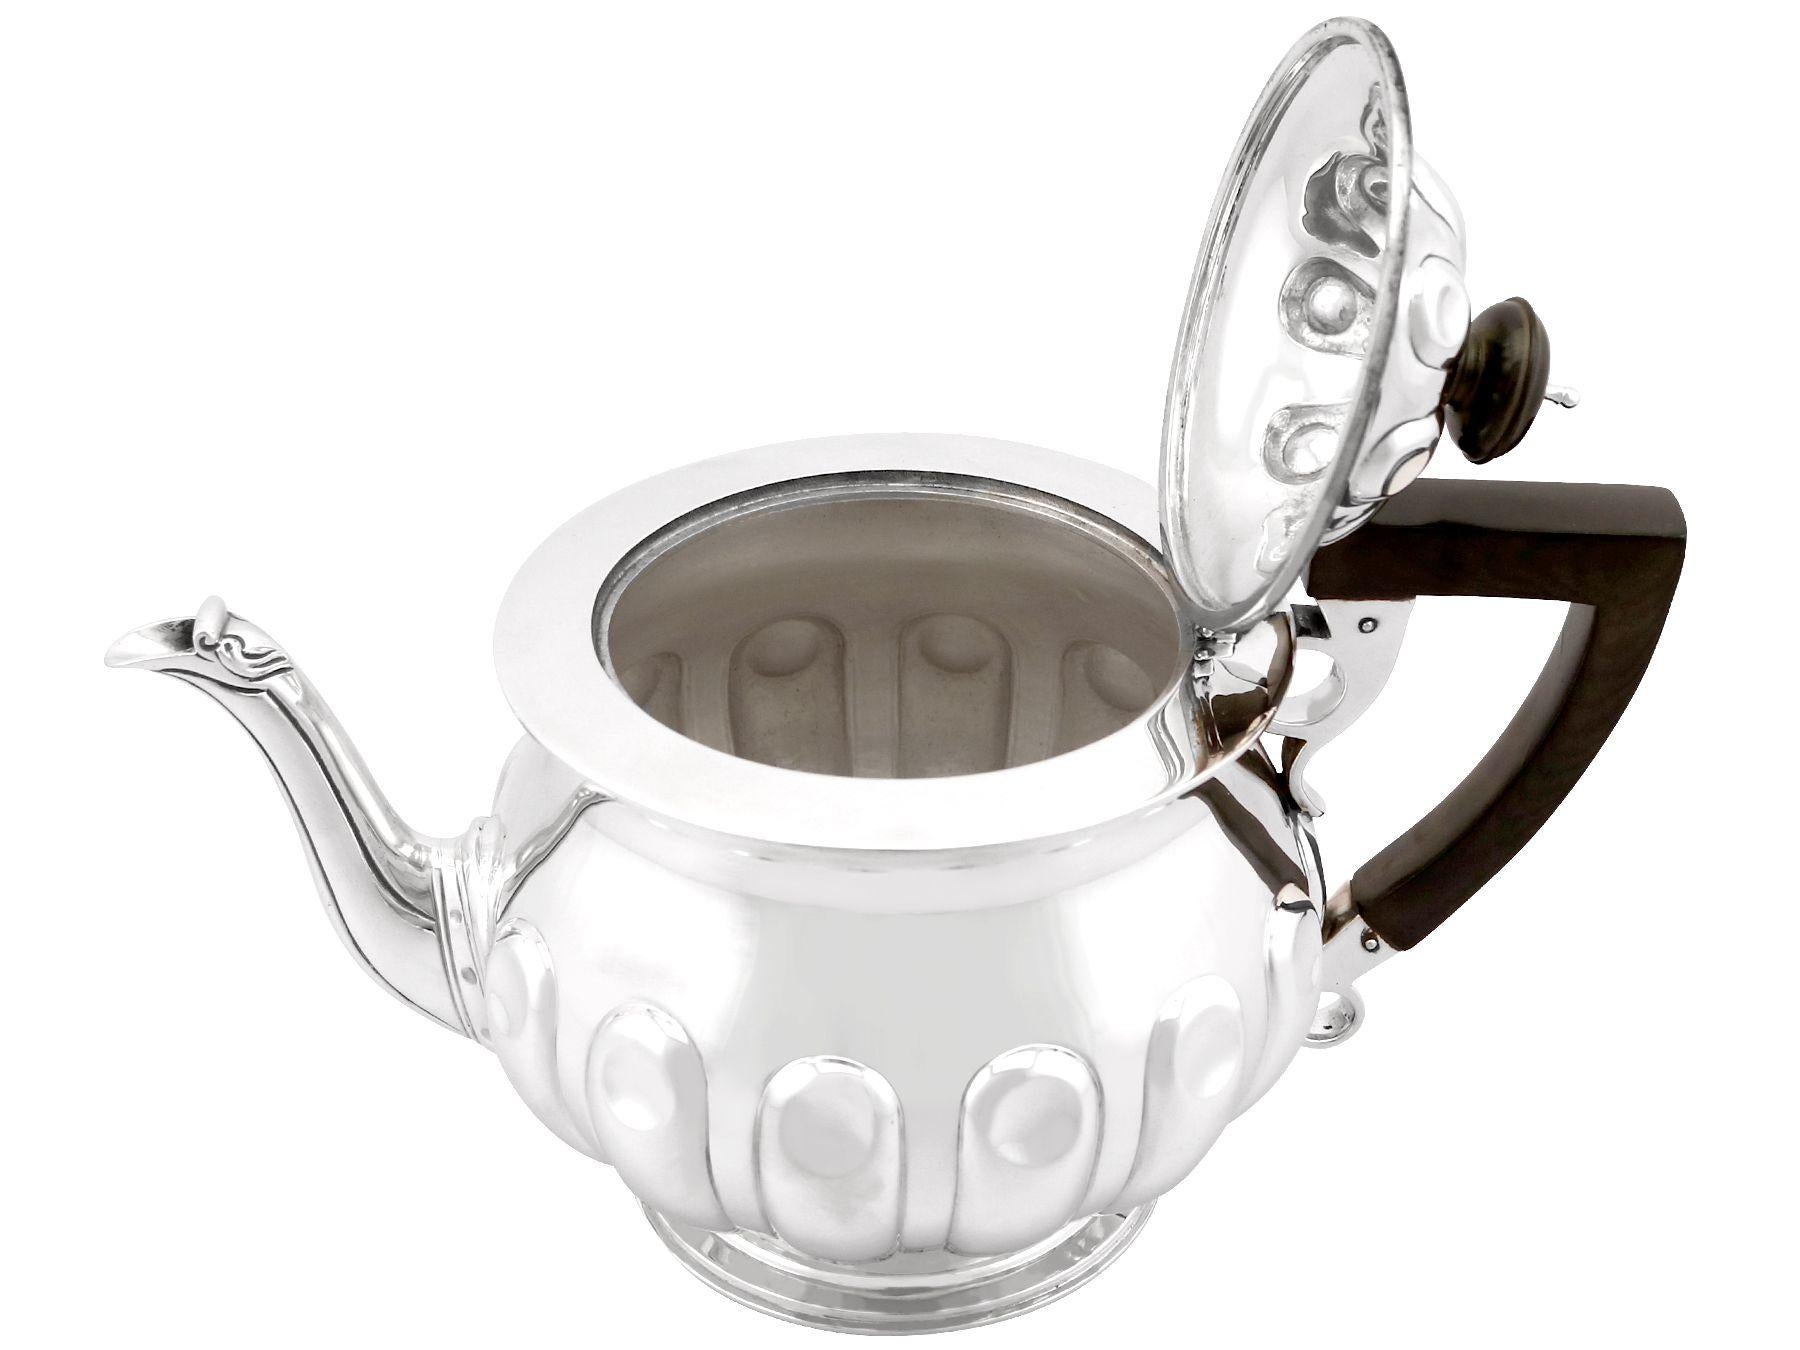 Arts and Crafts Reid & Sons Antique Edwardian Arts & Crafts Style Sterling Silver Teapot For Sale